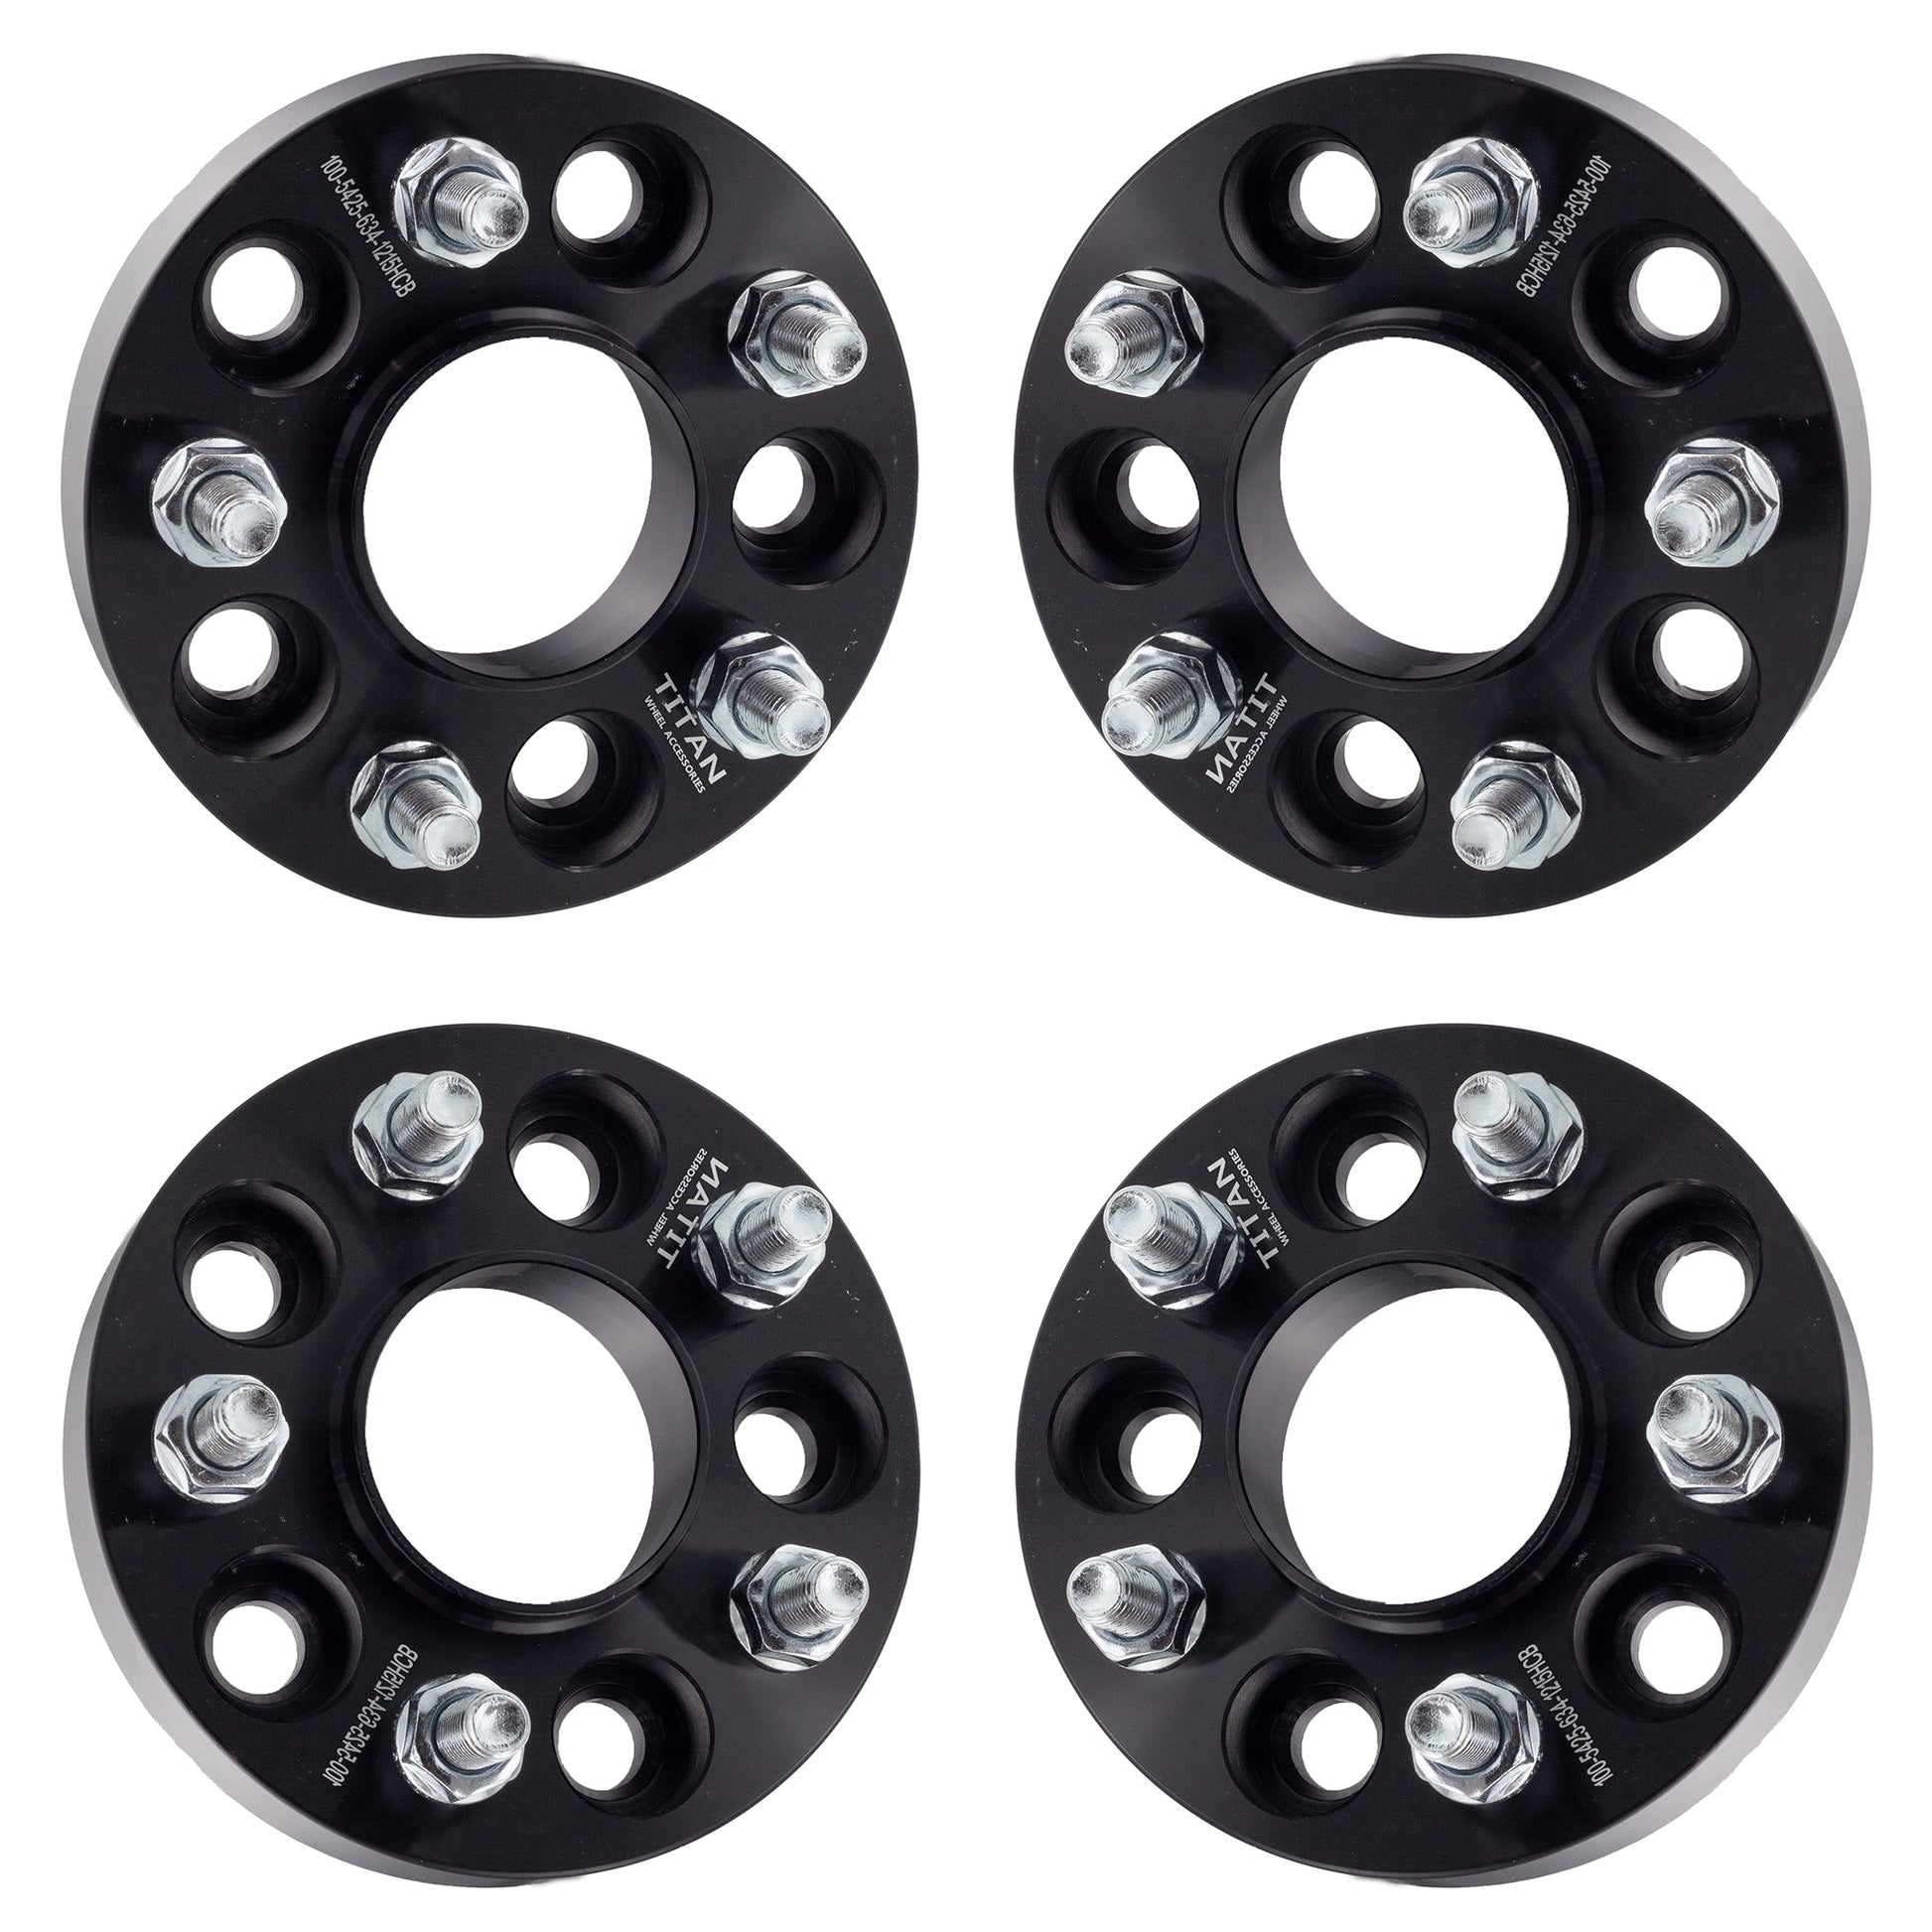 1.25" (32mm) Titan Wheel Spacers for Lincoln Continental LS MKC MKZ Mercury Monterey | 5x4.25 (5x108) | 63.4 Hubcentric | 12x1.5 Studs |  Set of 4